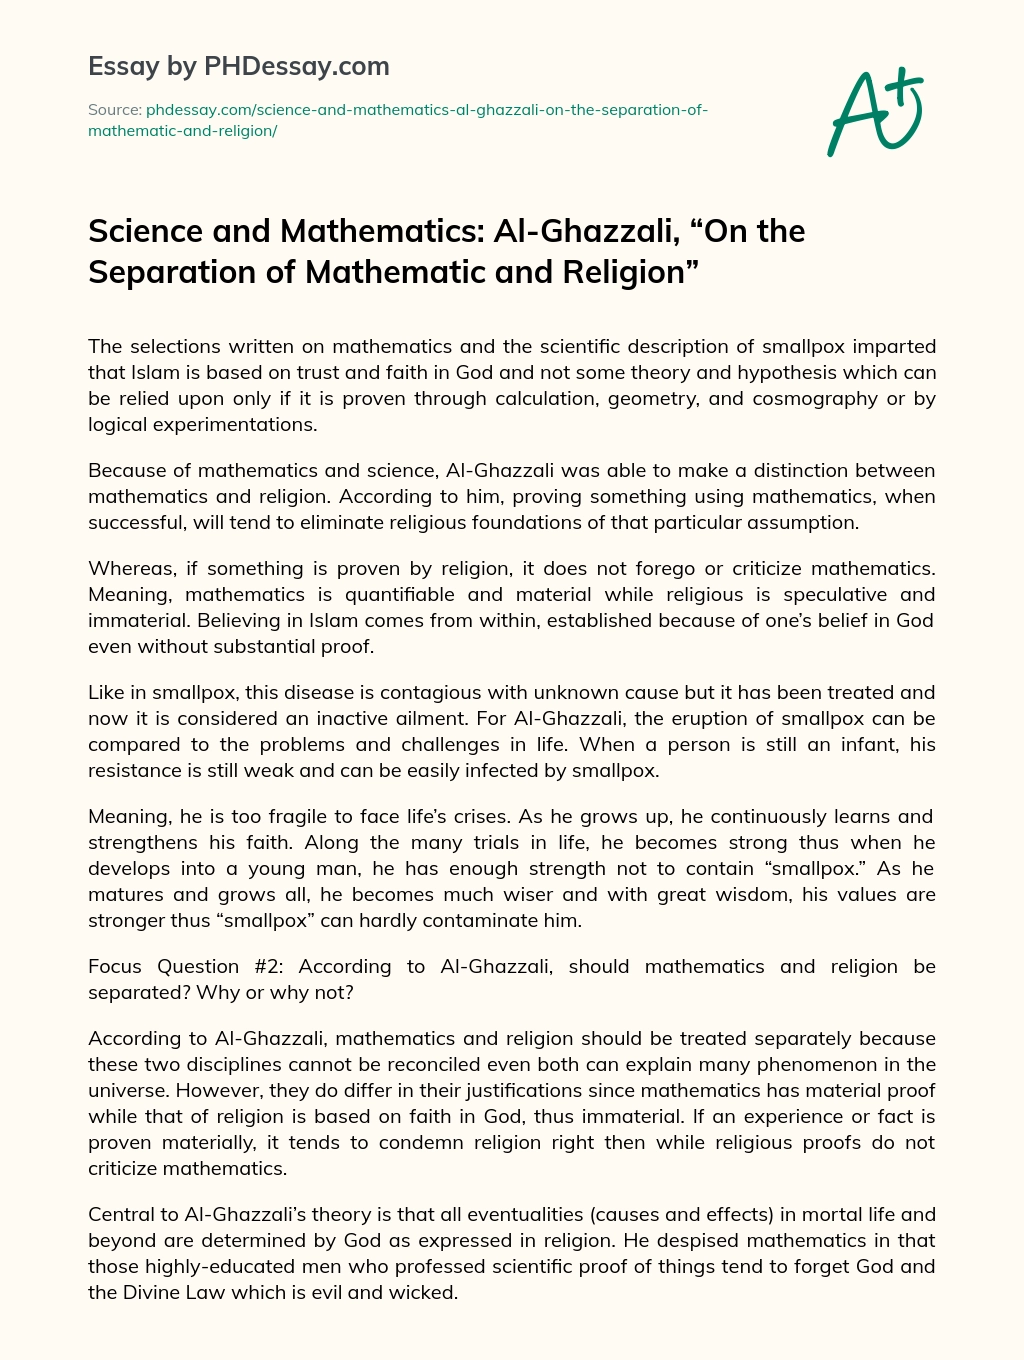 Science and Mathematics: Al-Ghazzali, “On the Separation of Mathematic and Religion” essay